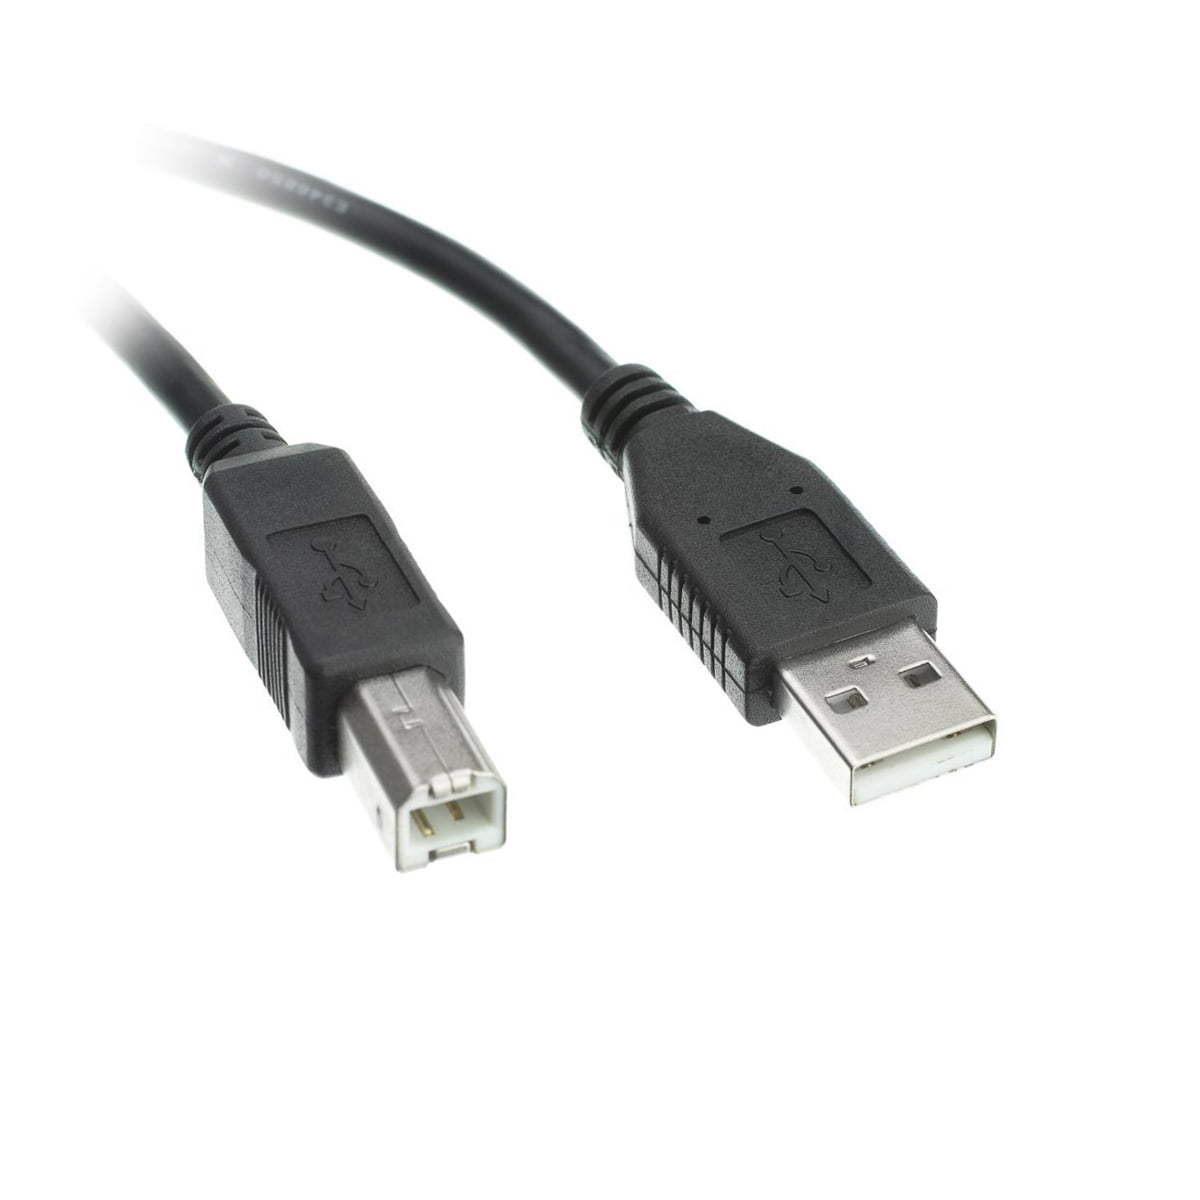 5 Pack Black ACL 1 Feet USB 2.0 A Male to Micro-B Male Cable 